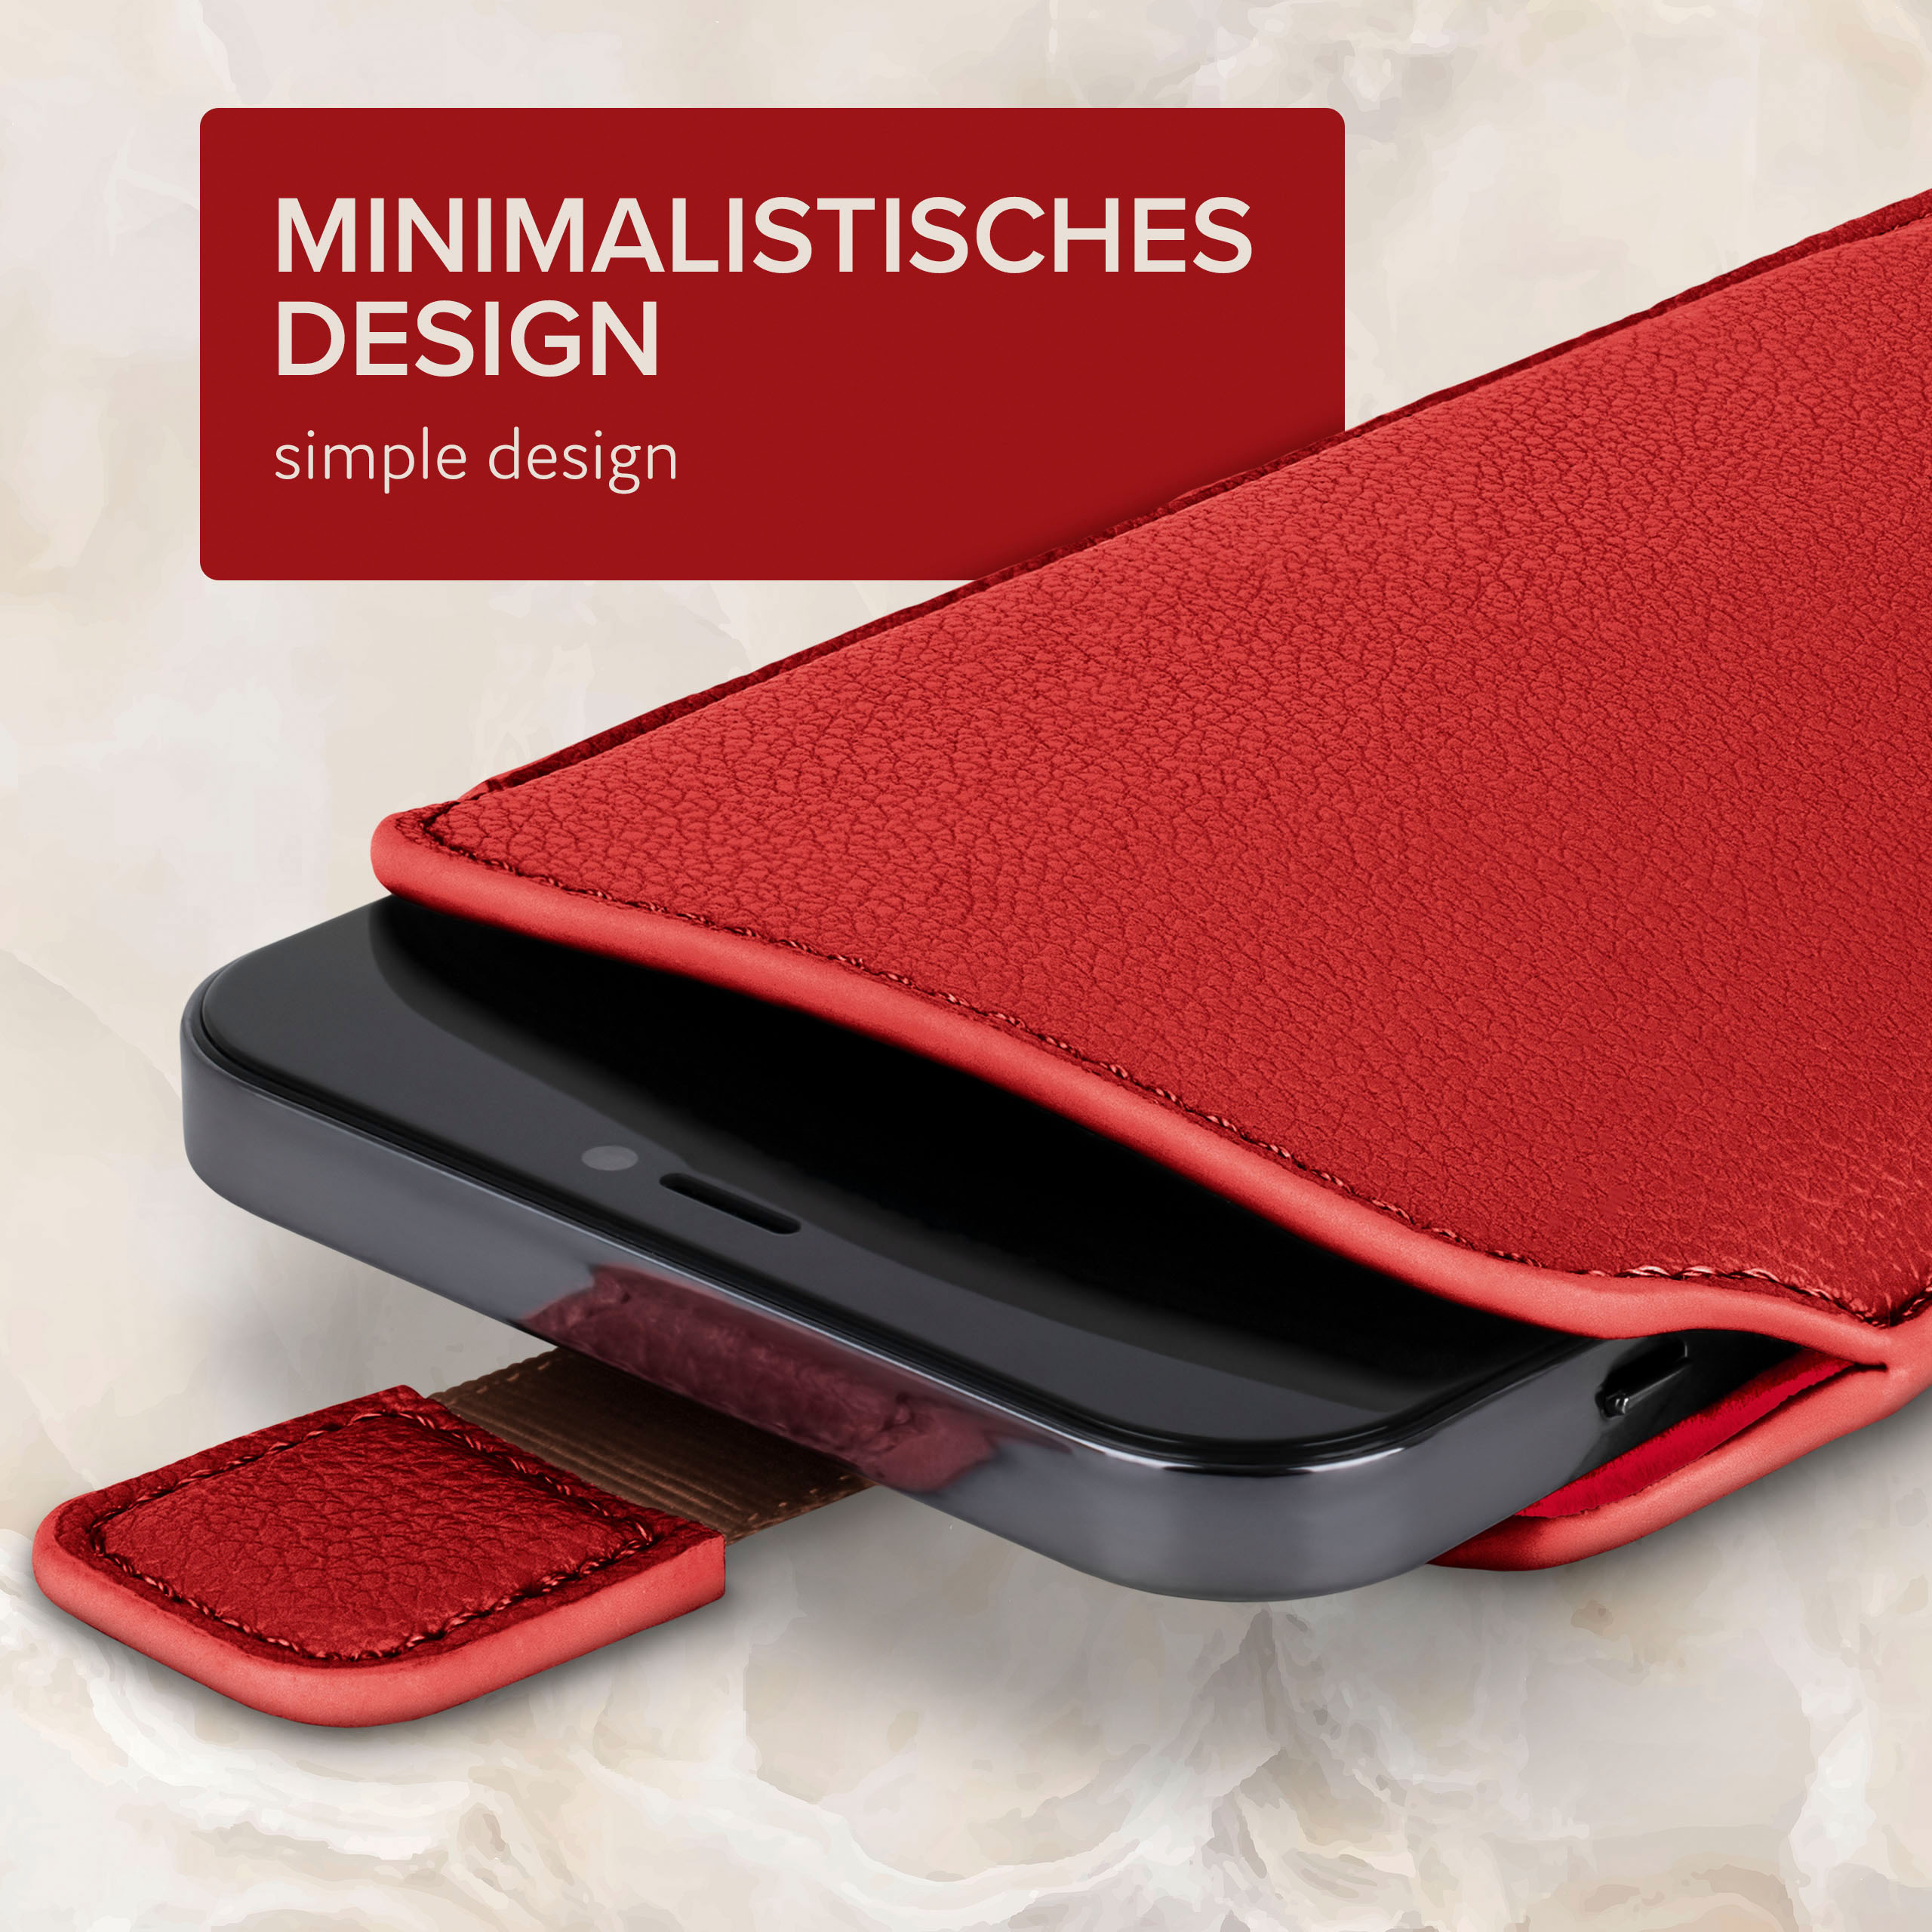 ONEFLOW Z1 Compact, Cover, Zuglasche, Dunkelrot mit Einsteckhülle Xperia Full Sony,